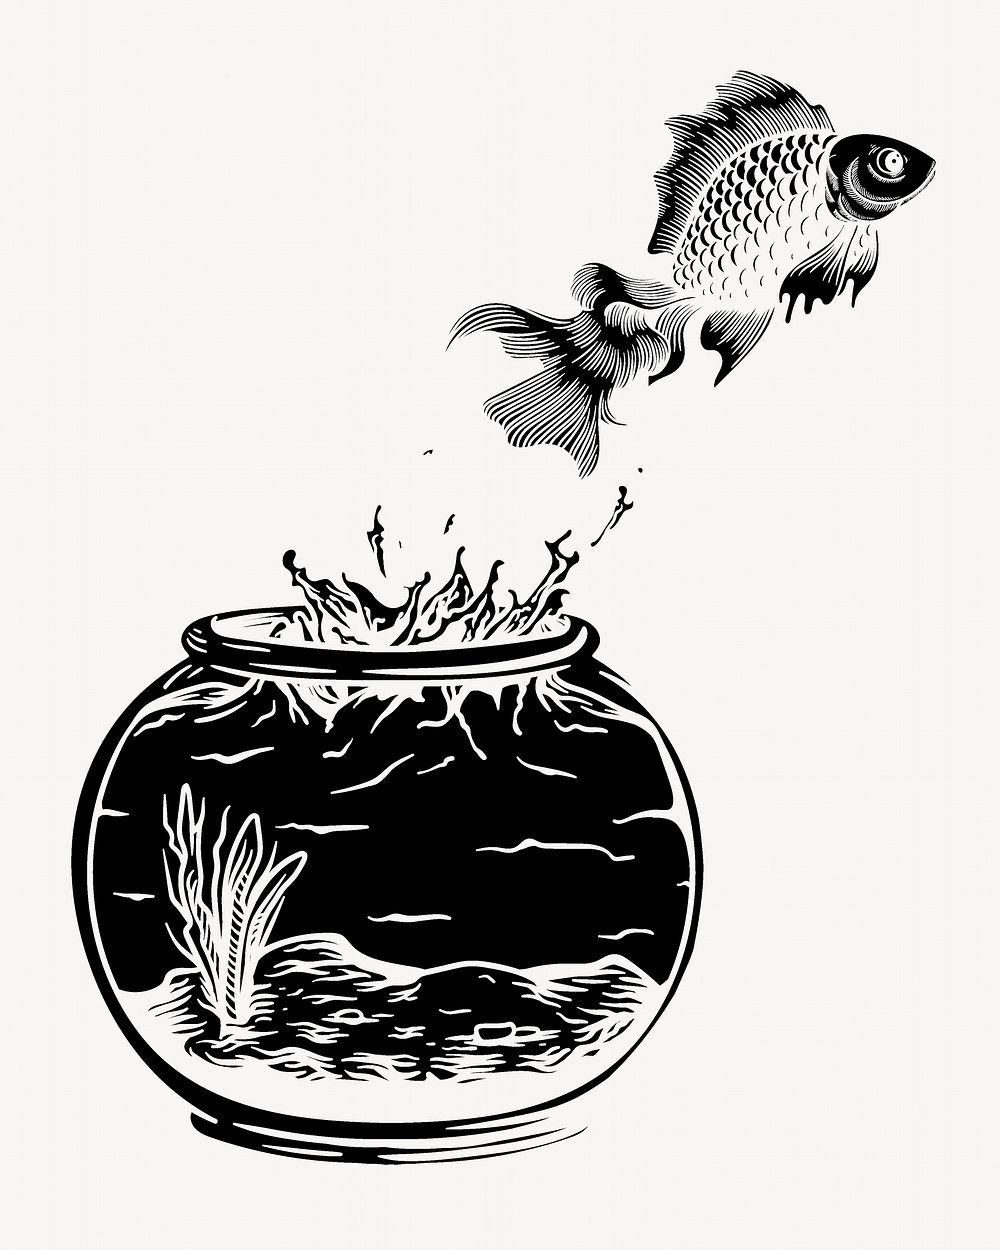 Fish escaping bowl, animal isolated image